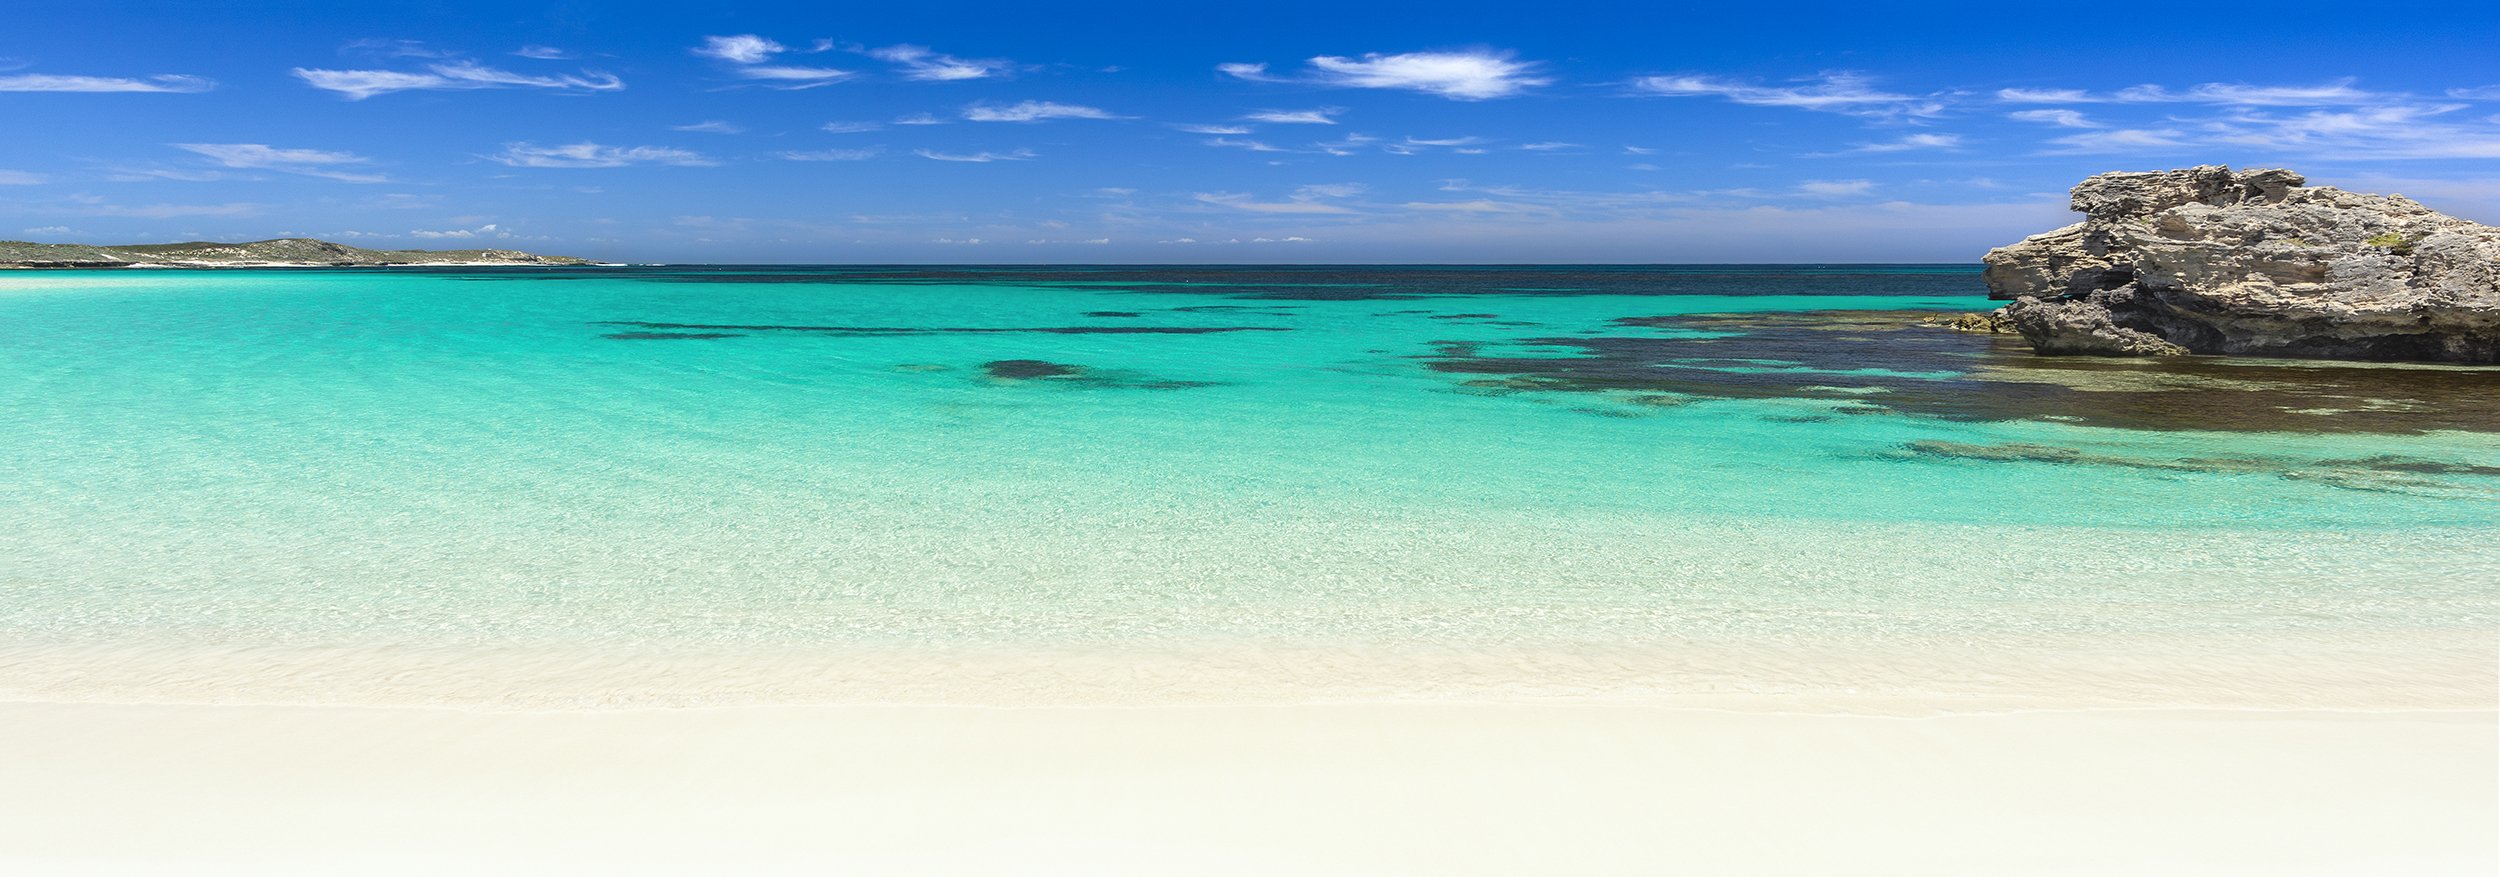 STRICKLAND BAY - ROTTNEST BEST from $255 AUD